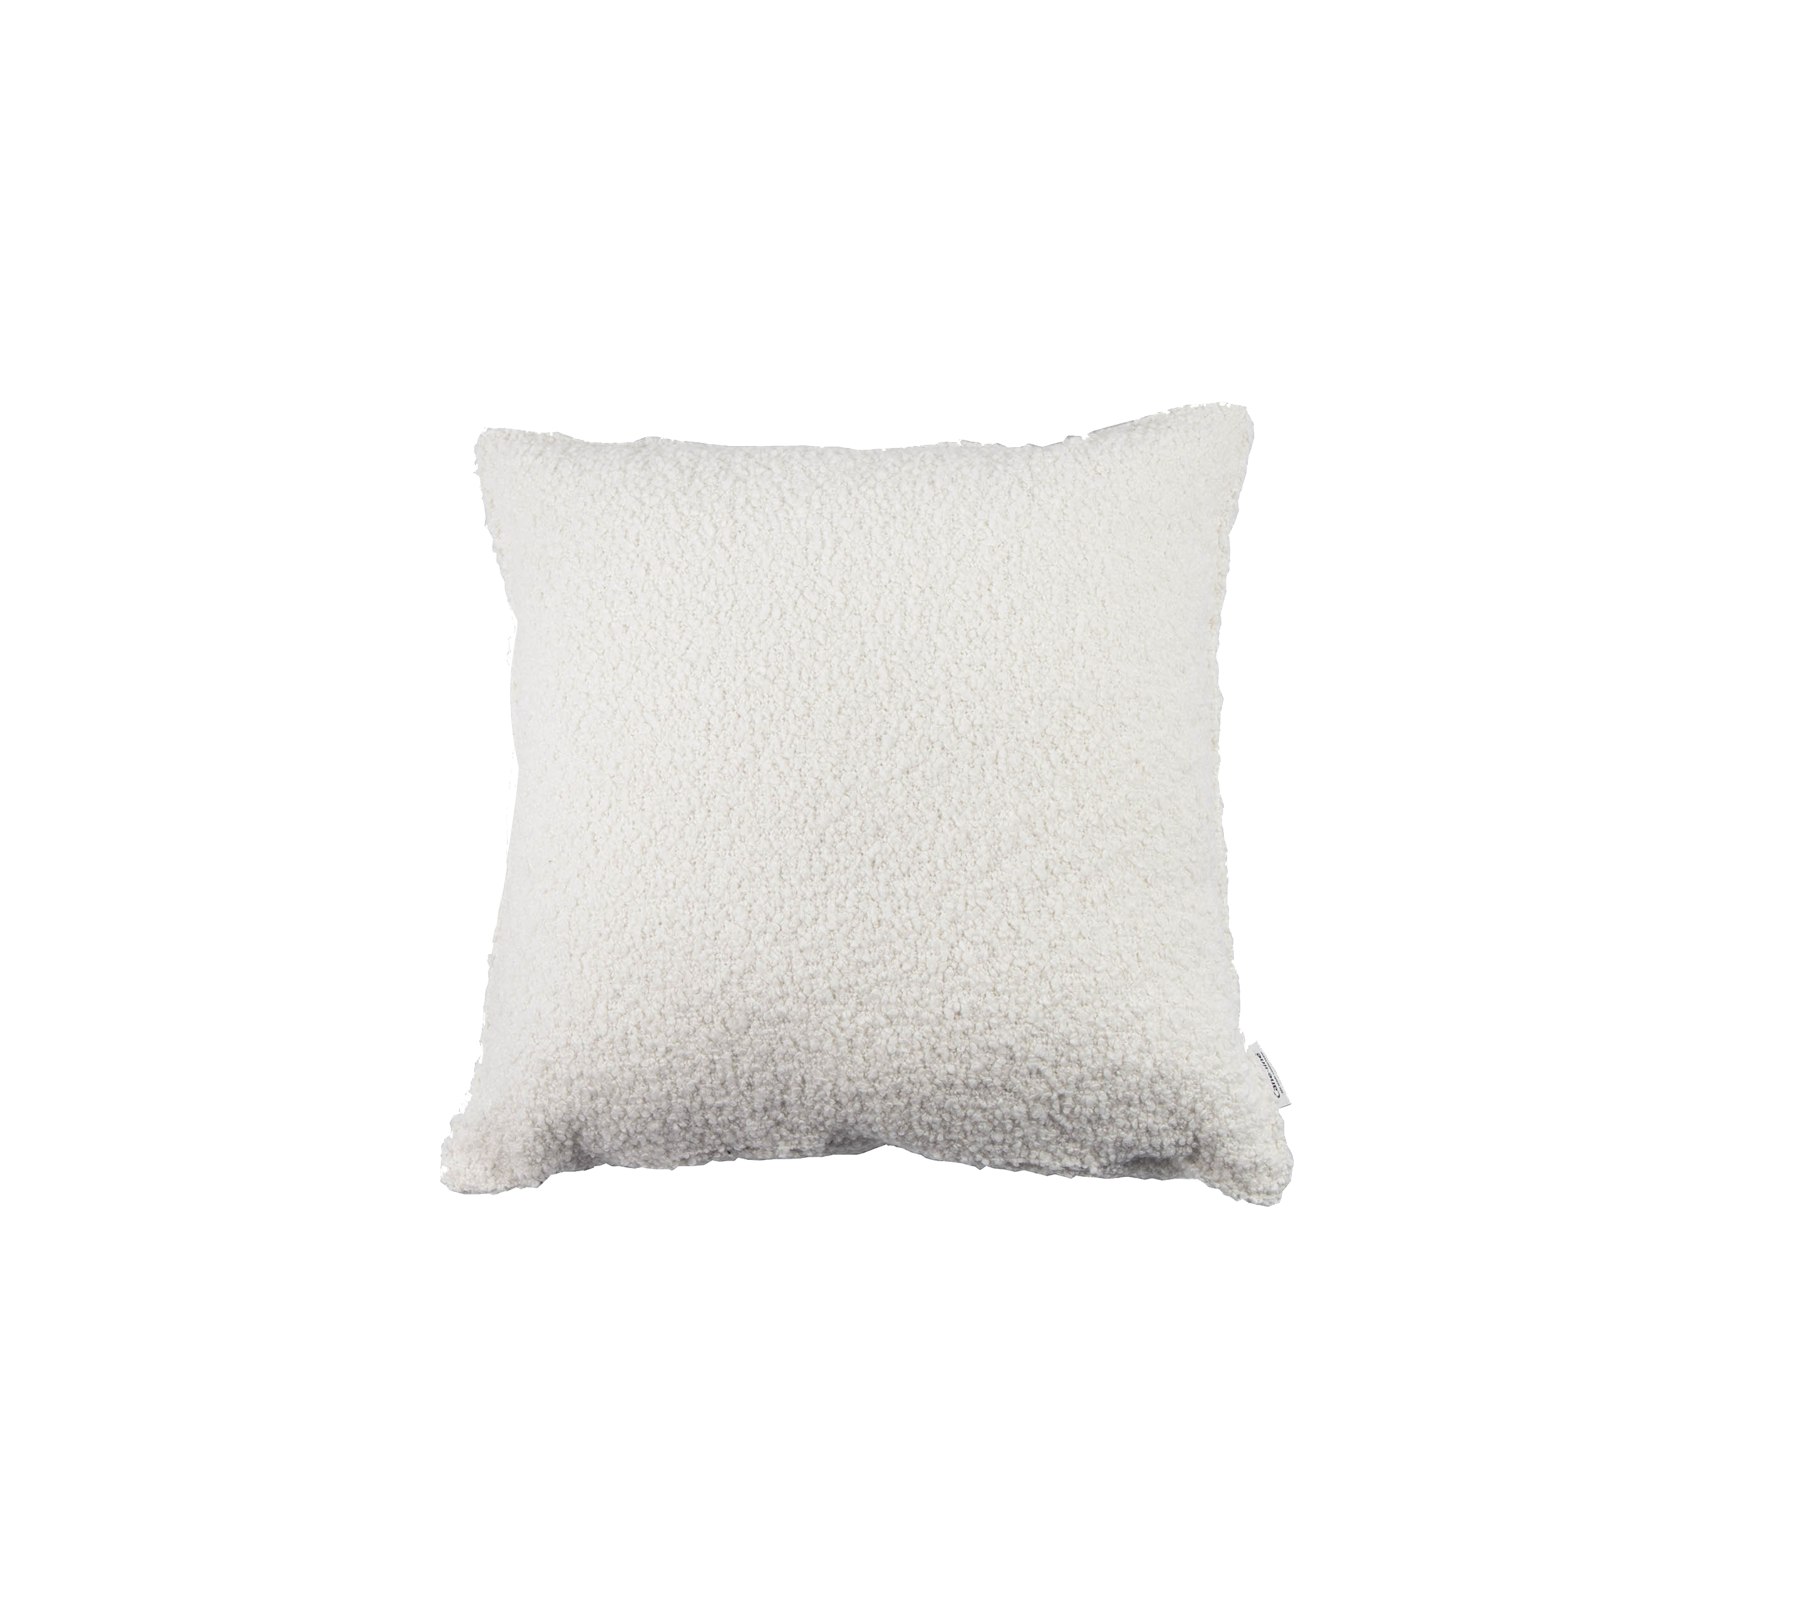 Scent scatter cushion, 50x50 cm